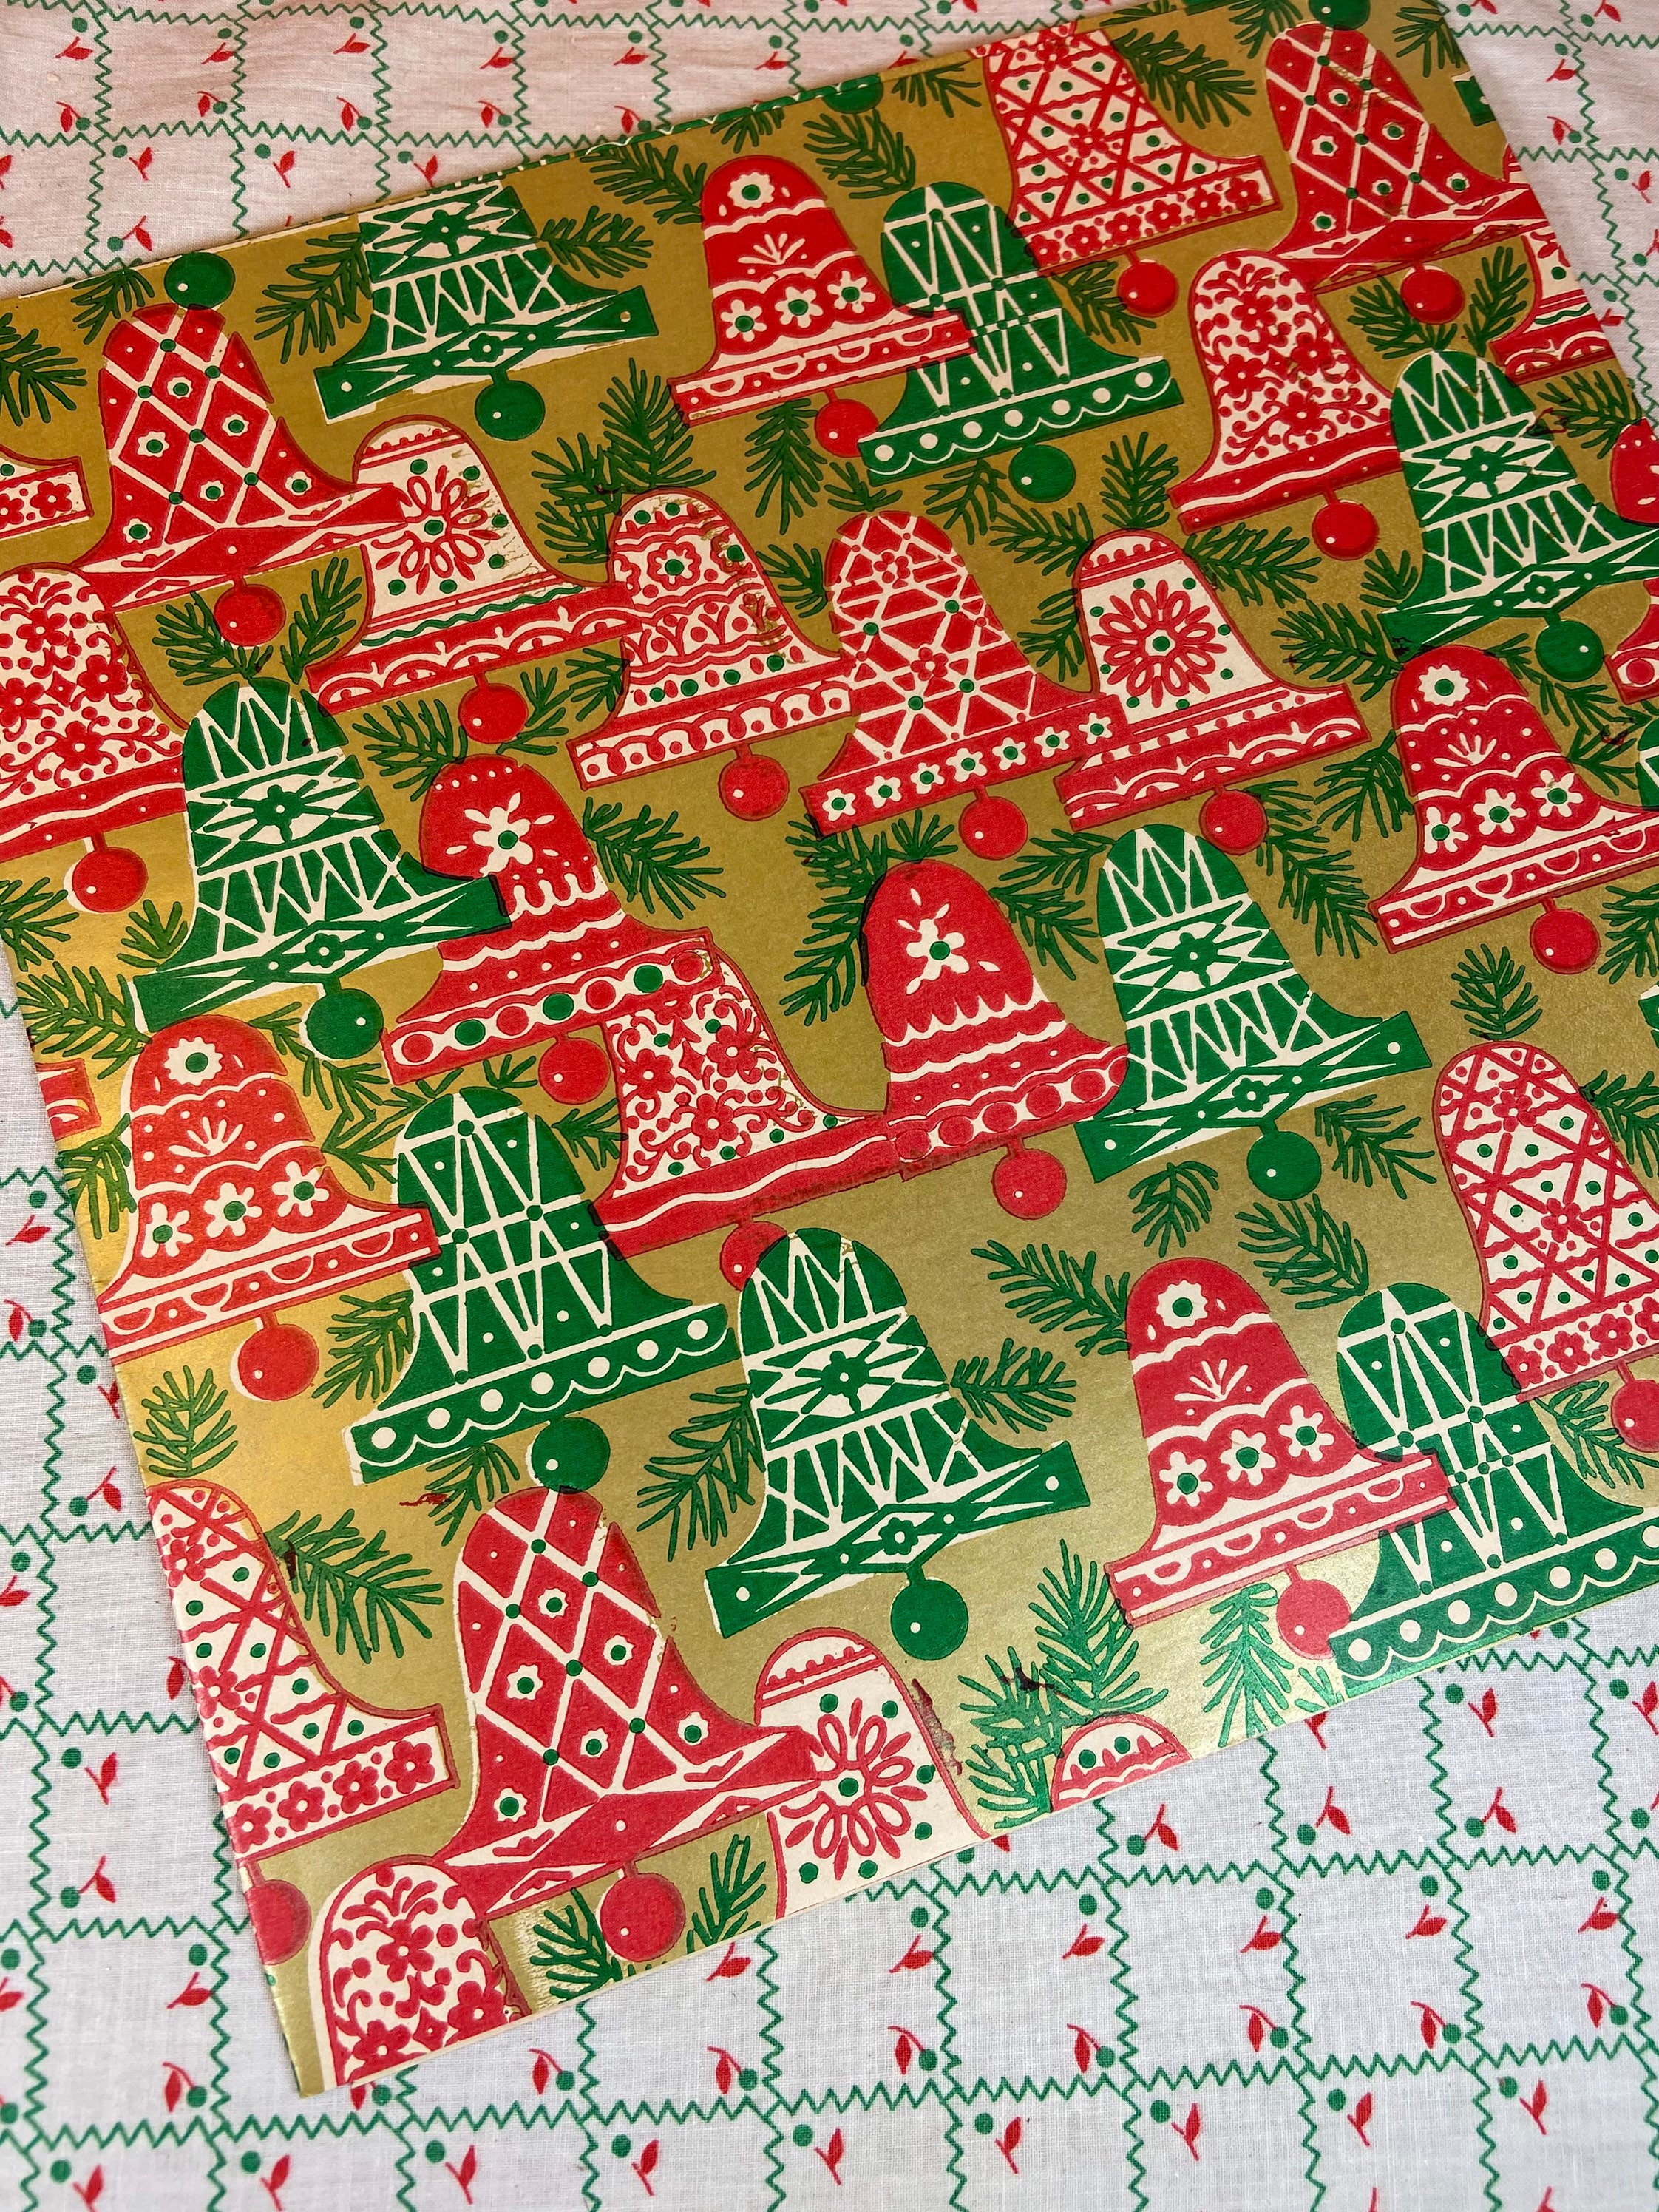 Lot of 16 Vintage Christmas Square Tissue / Wrapping Paper 1950's